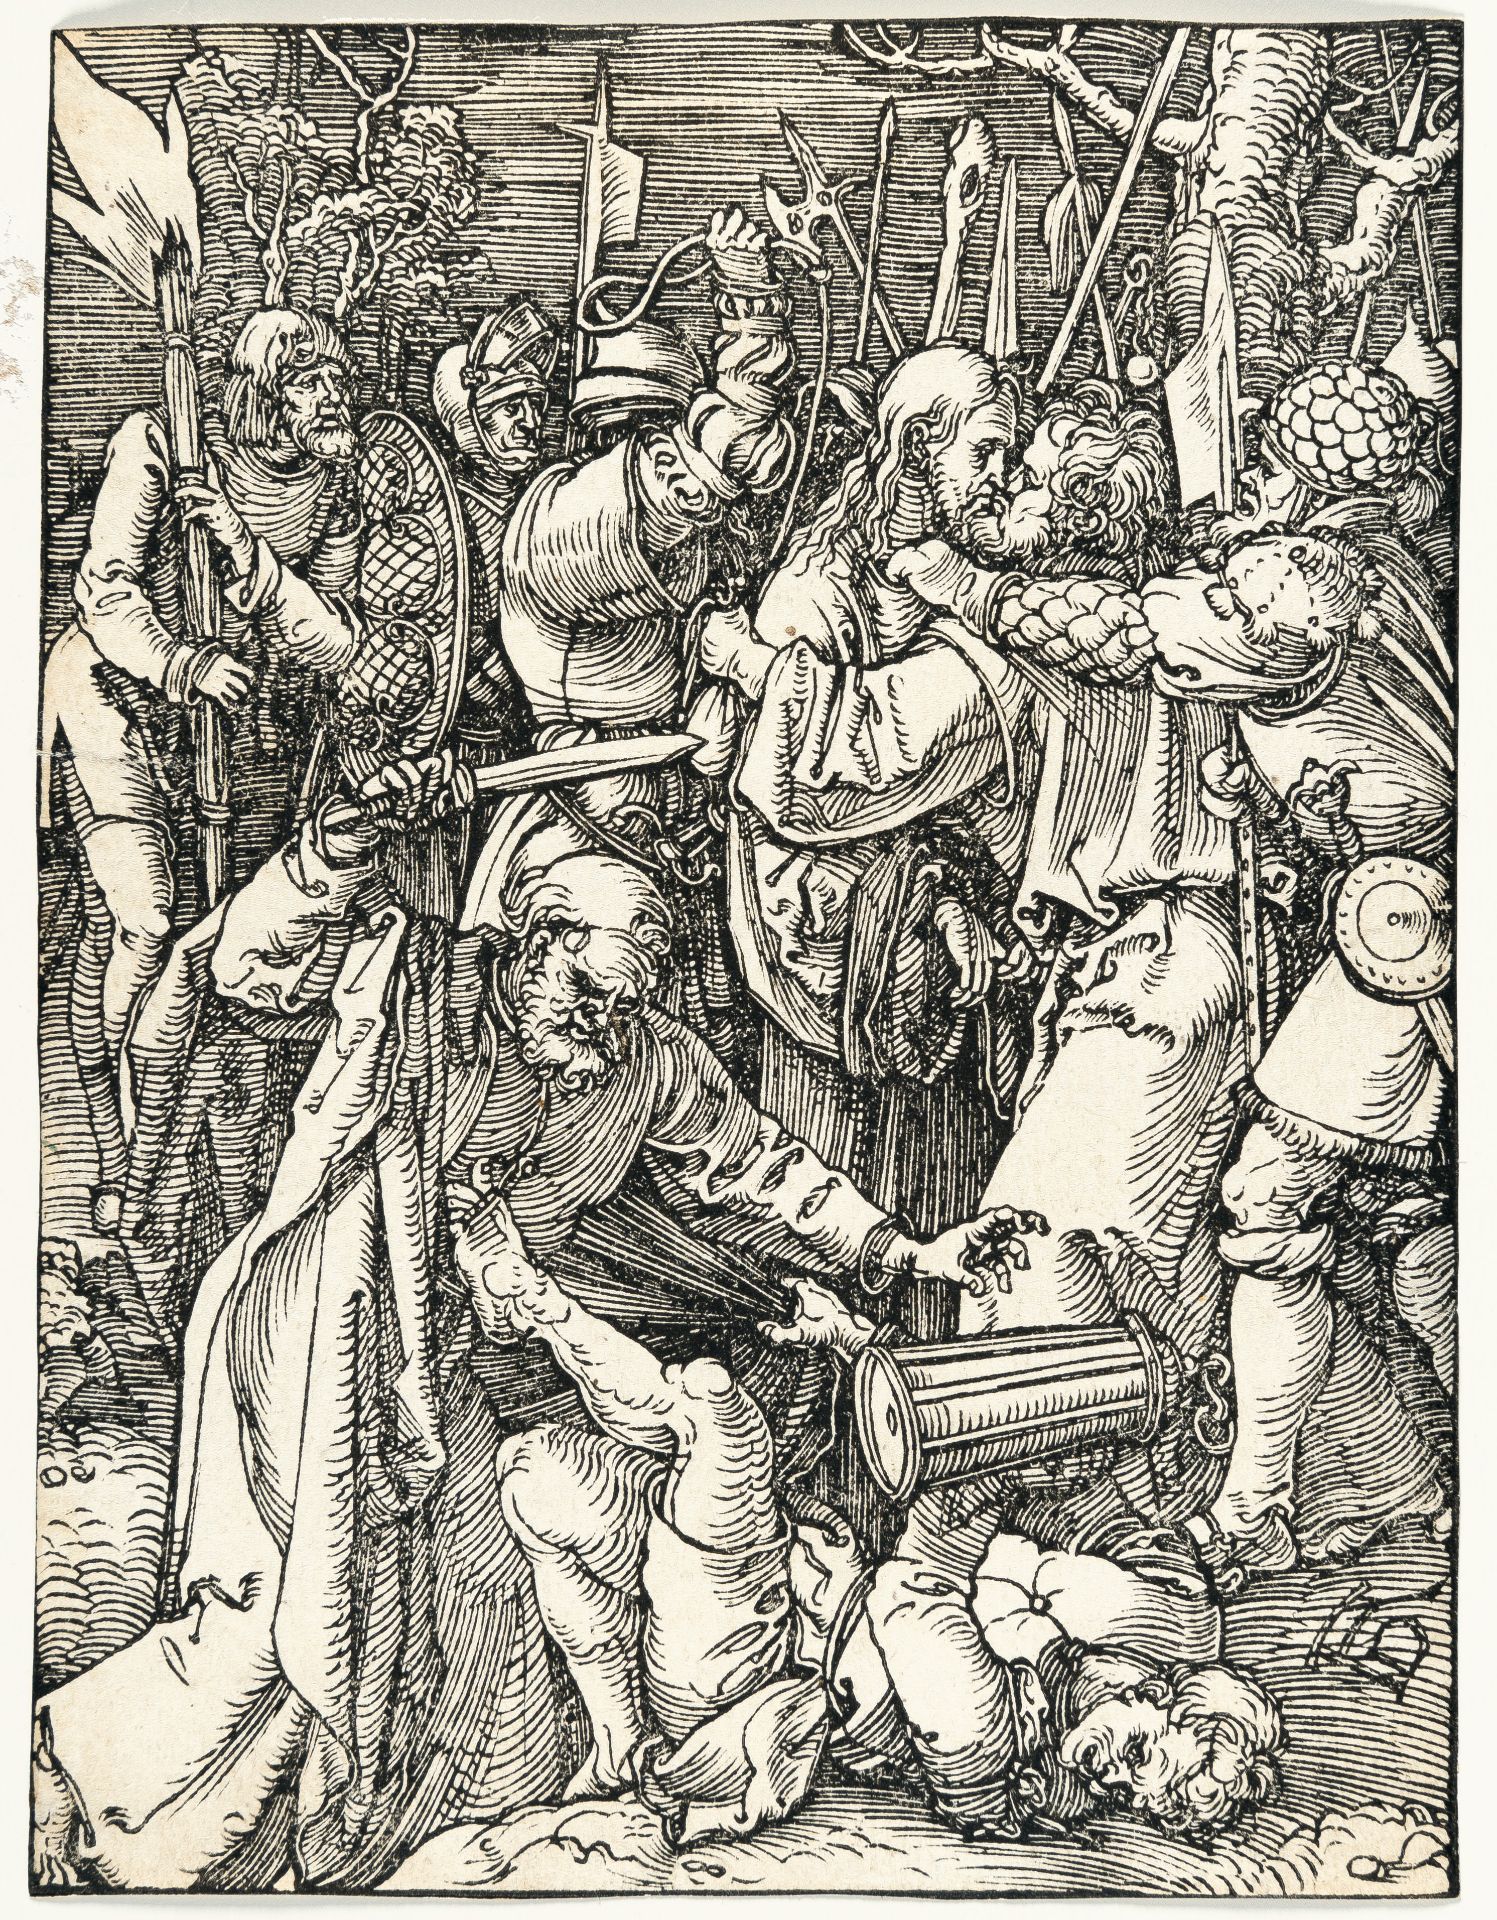 Albrecht Dürer (1471 - Nürnberg - 1528) – The betrayal of Christ (From "The Small Passion") - Image 2 of 3